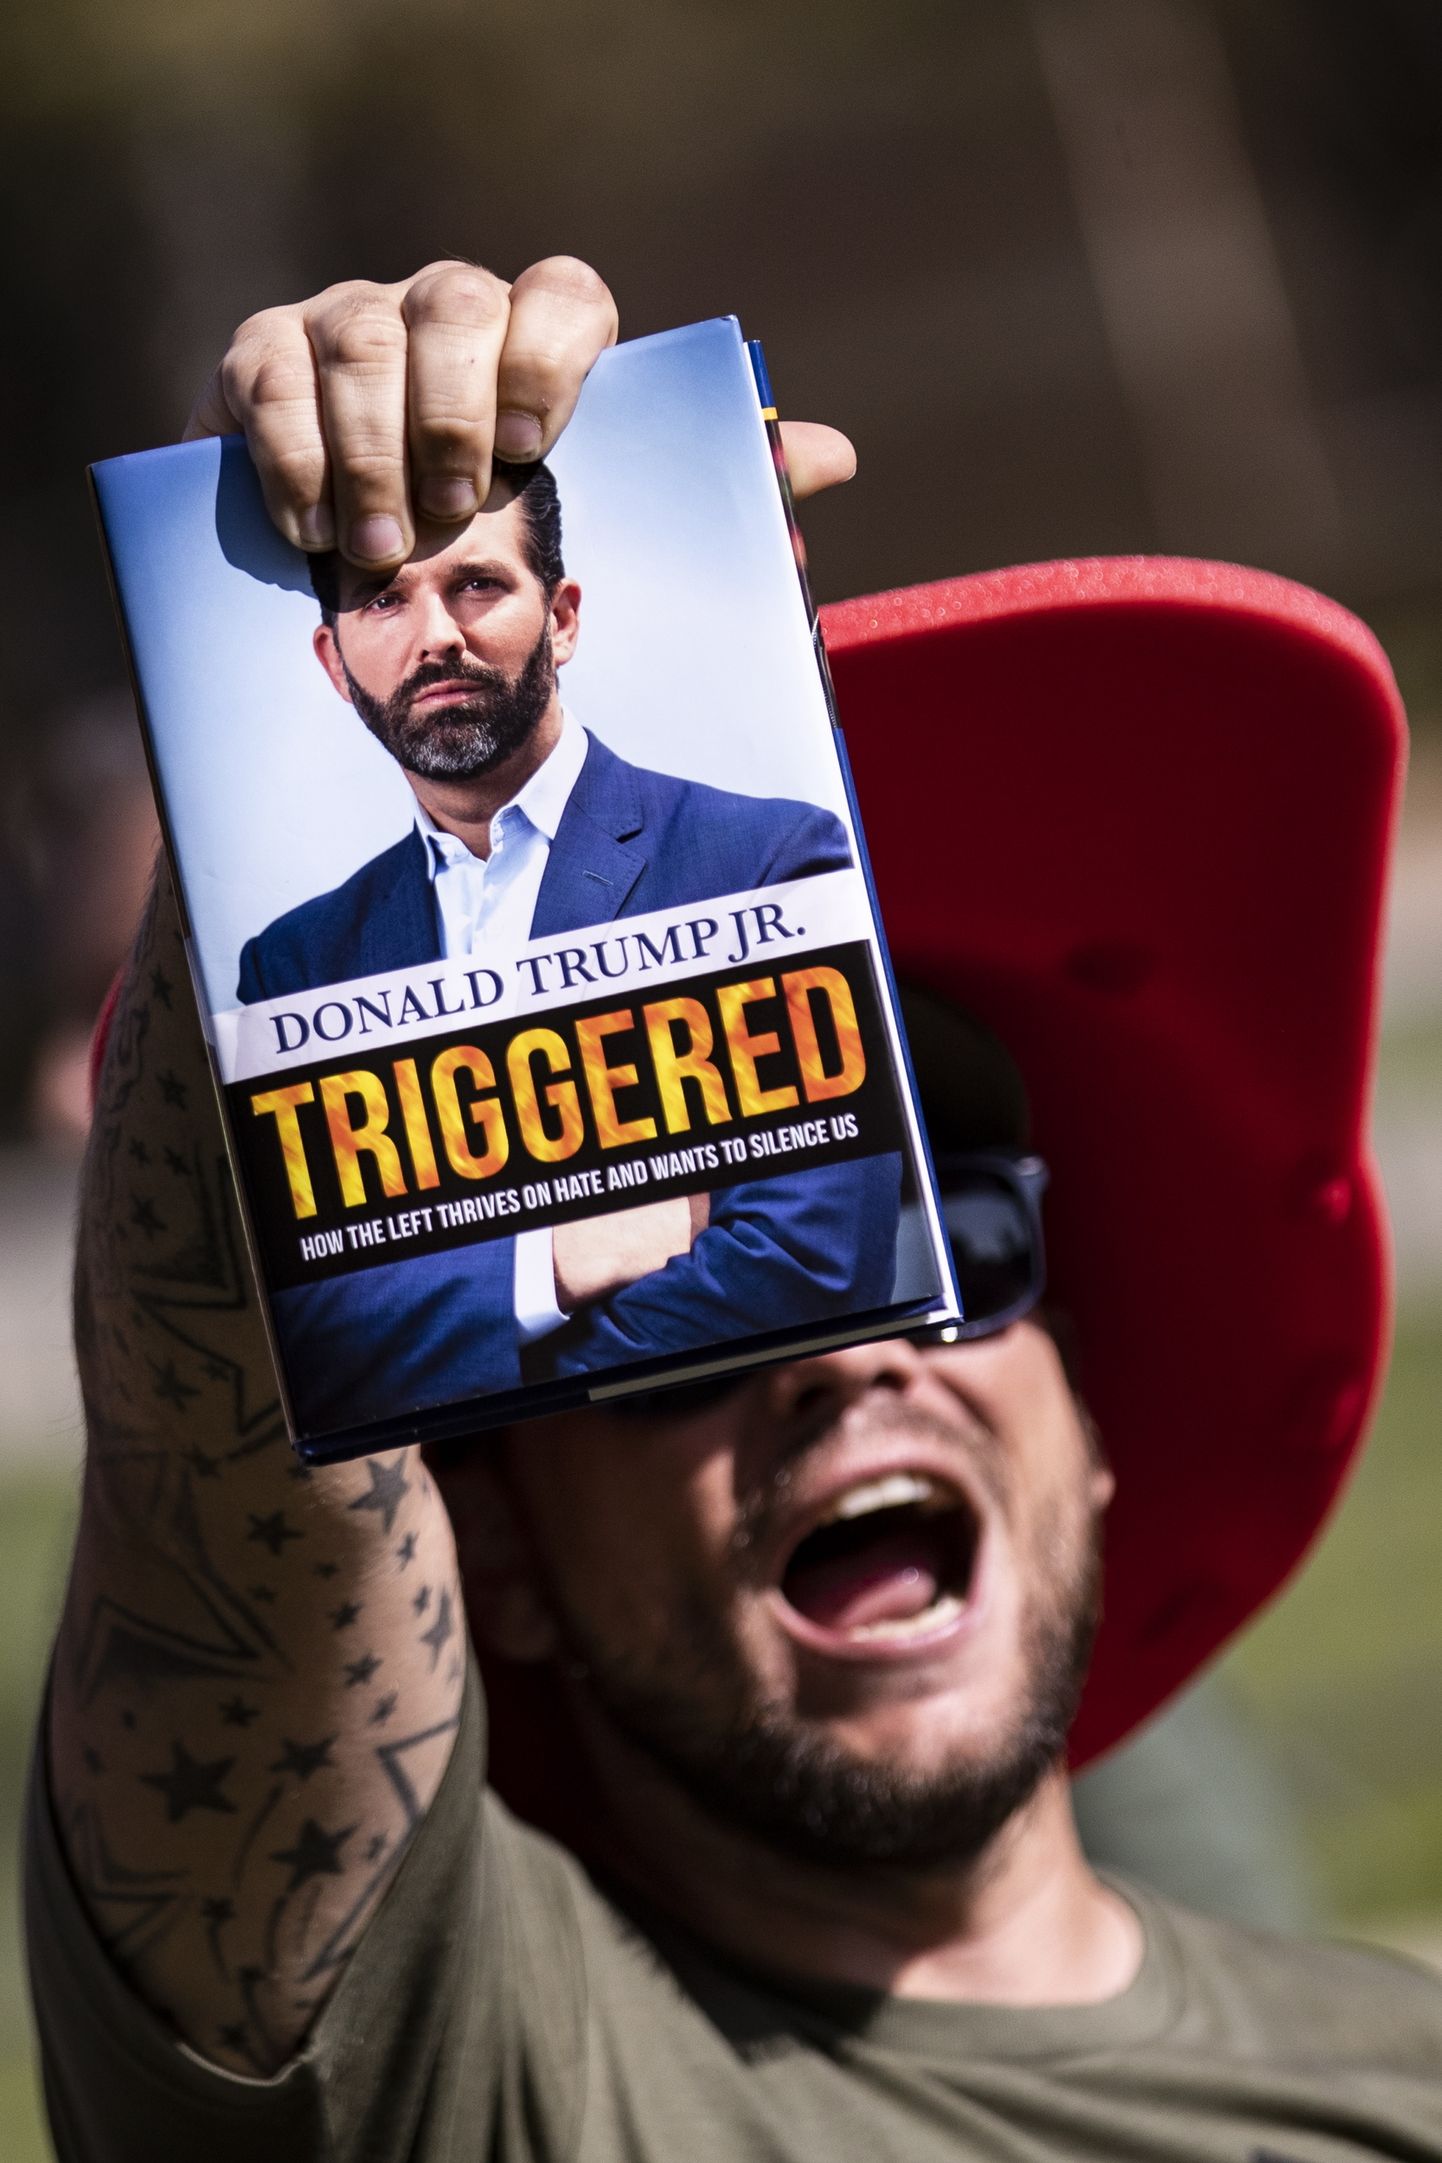 Donald Trump Jr raamat "Triggered: How the Left Thrives on Hate and Wants to Silence Us" protestija käes.